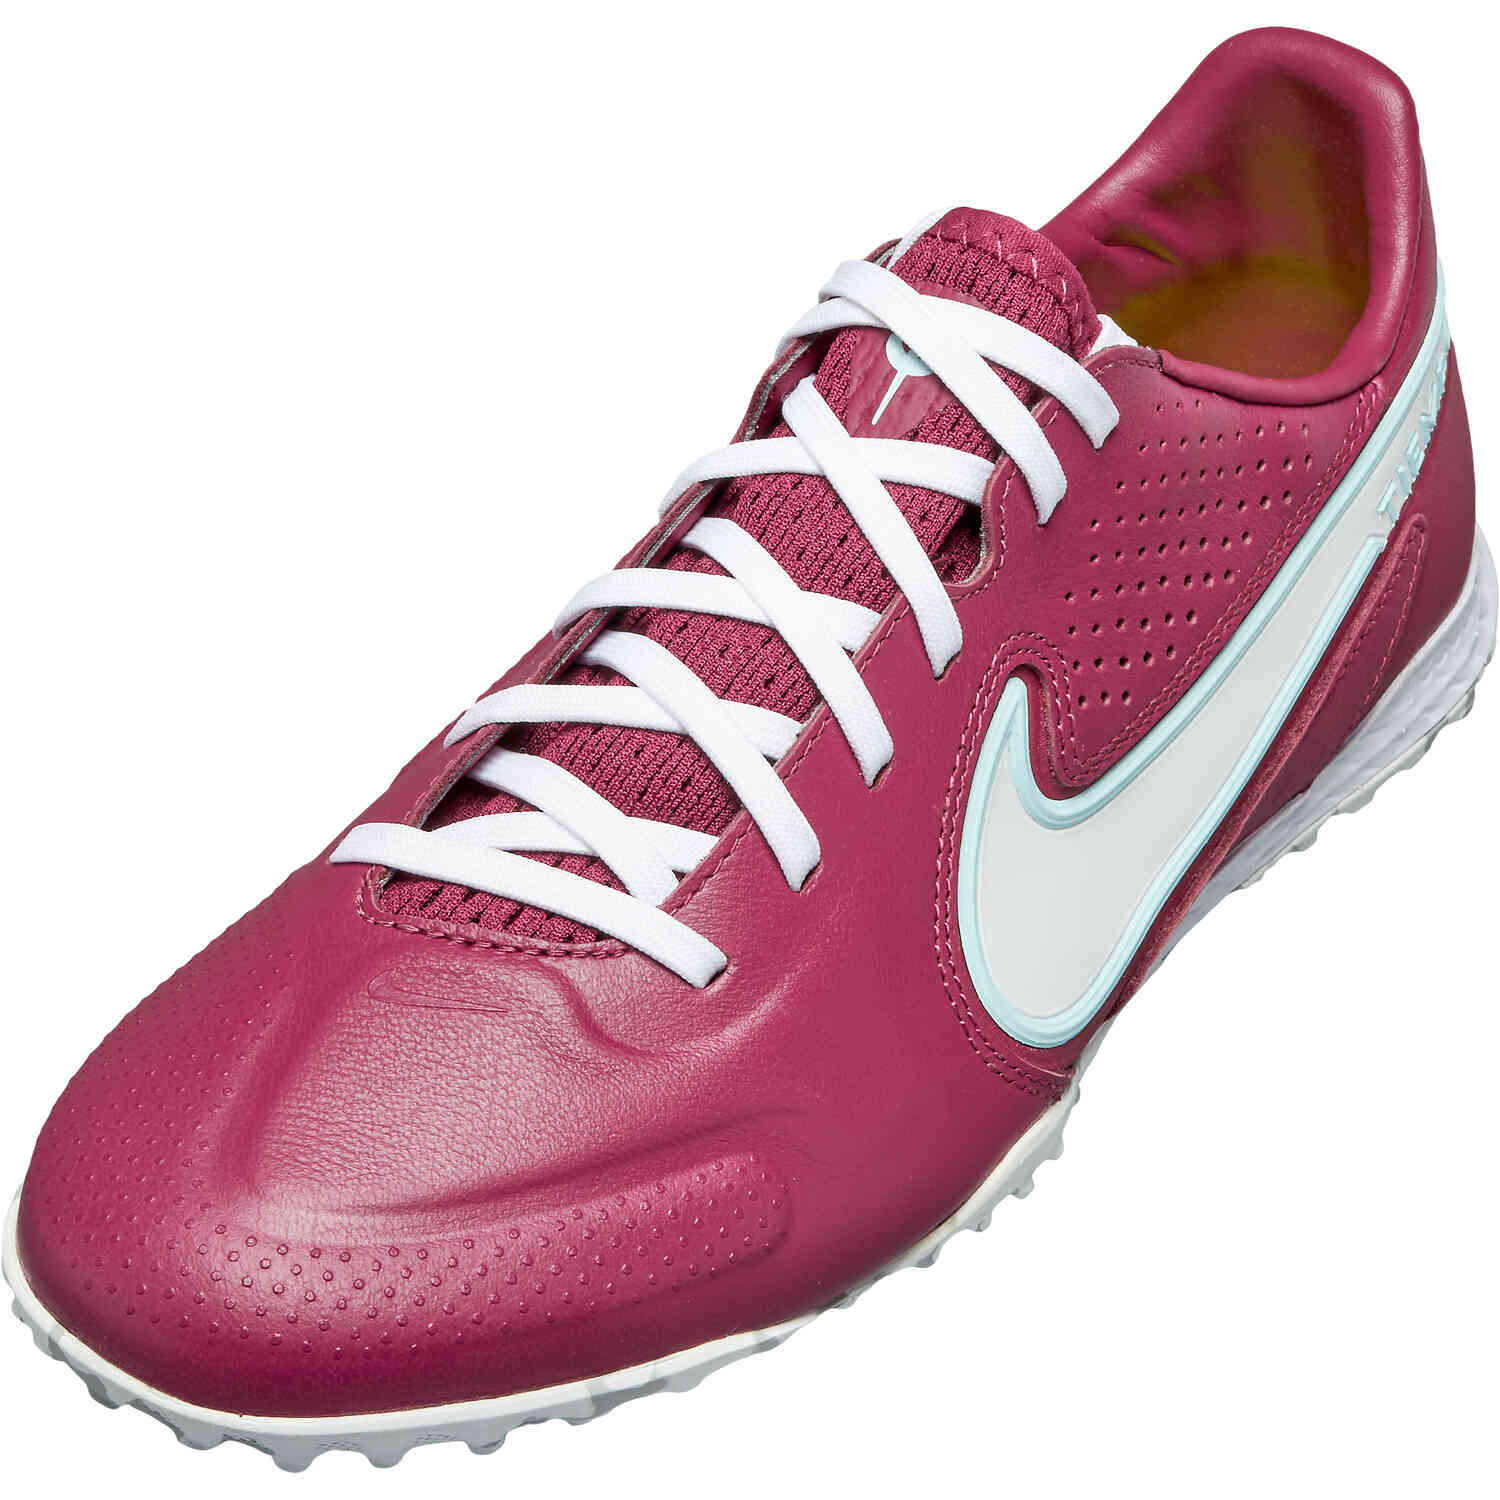 Tiempo Legend 9 TF - Rosewood & with Glacier Blue with Pink - SoccerPro